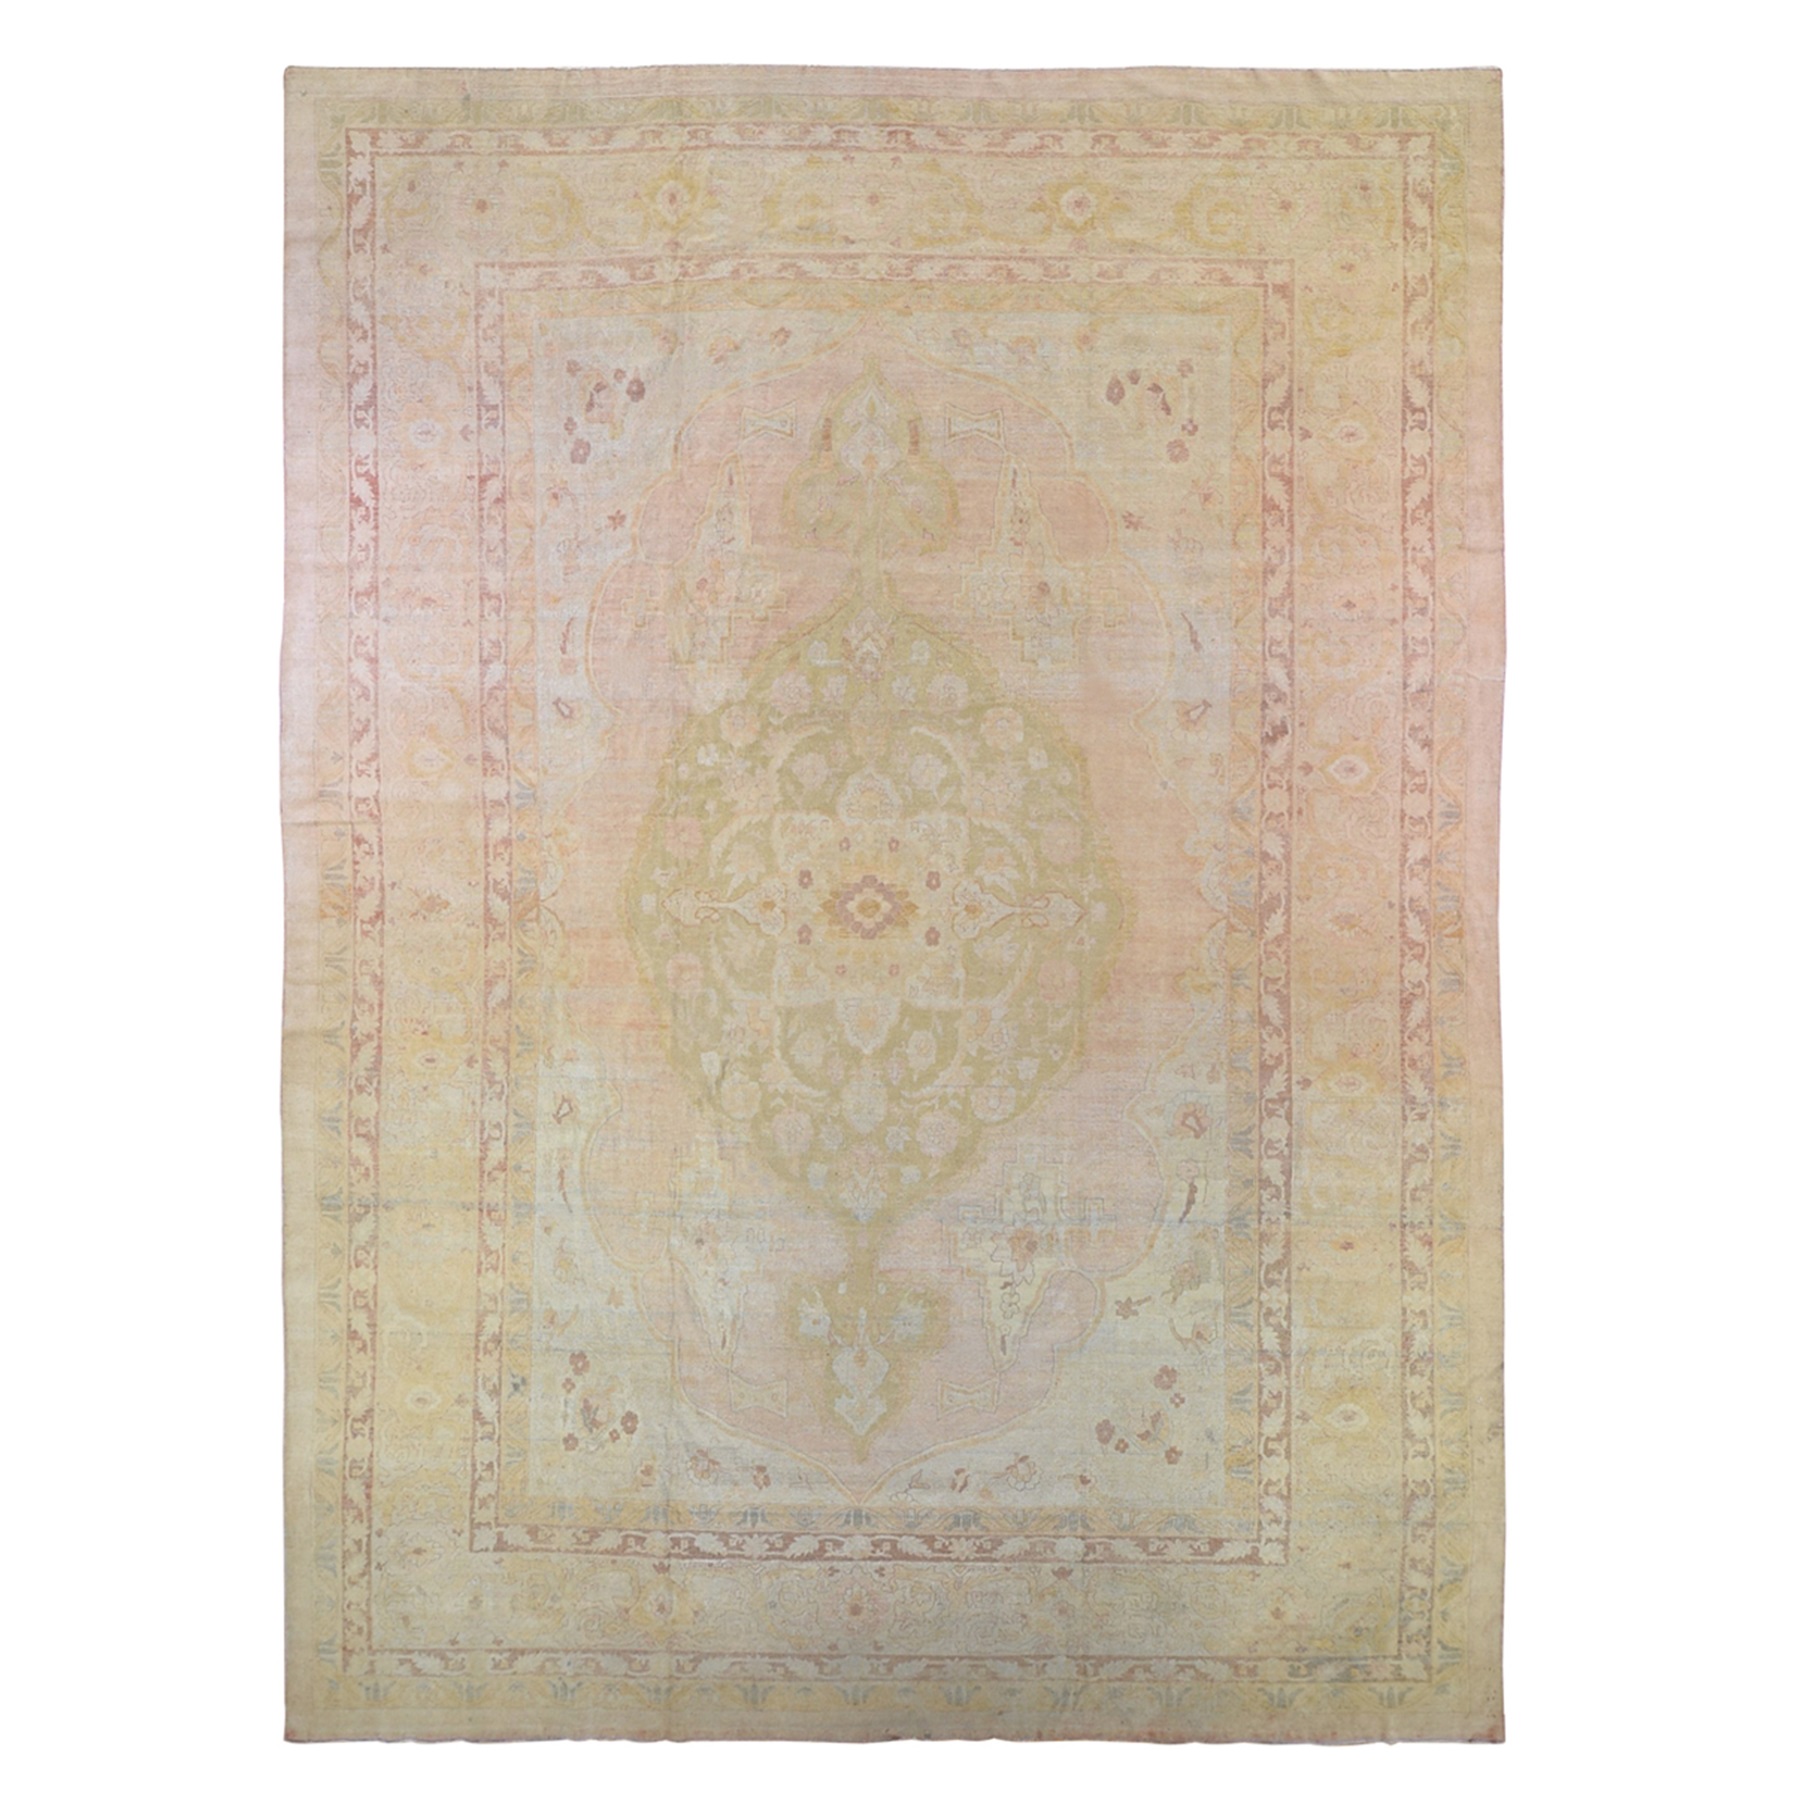 Antique Collection Hand Knotted Beige Rug No: 1133010